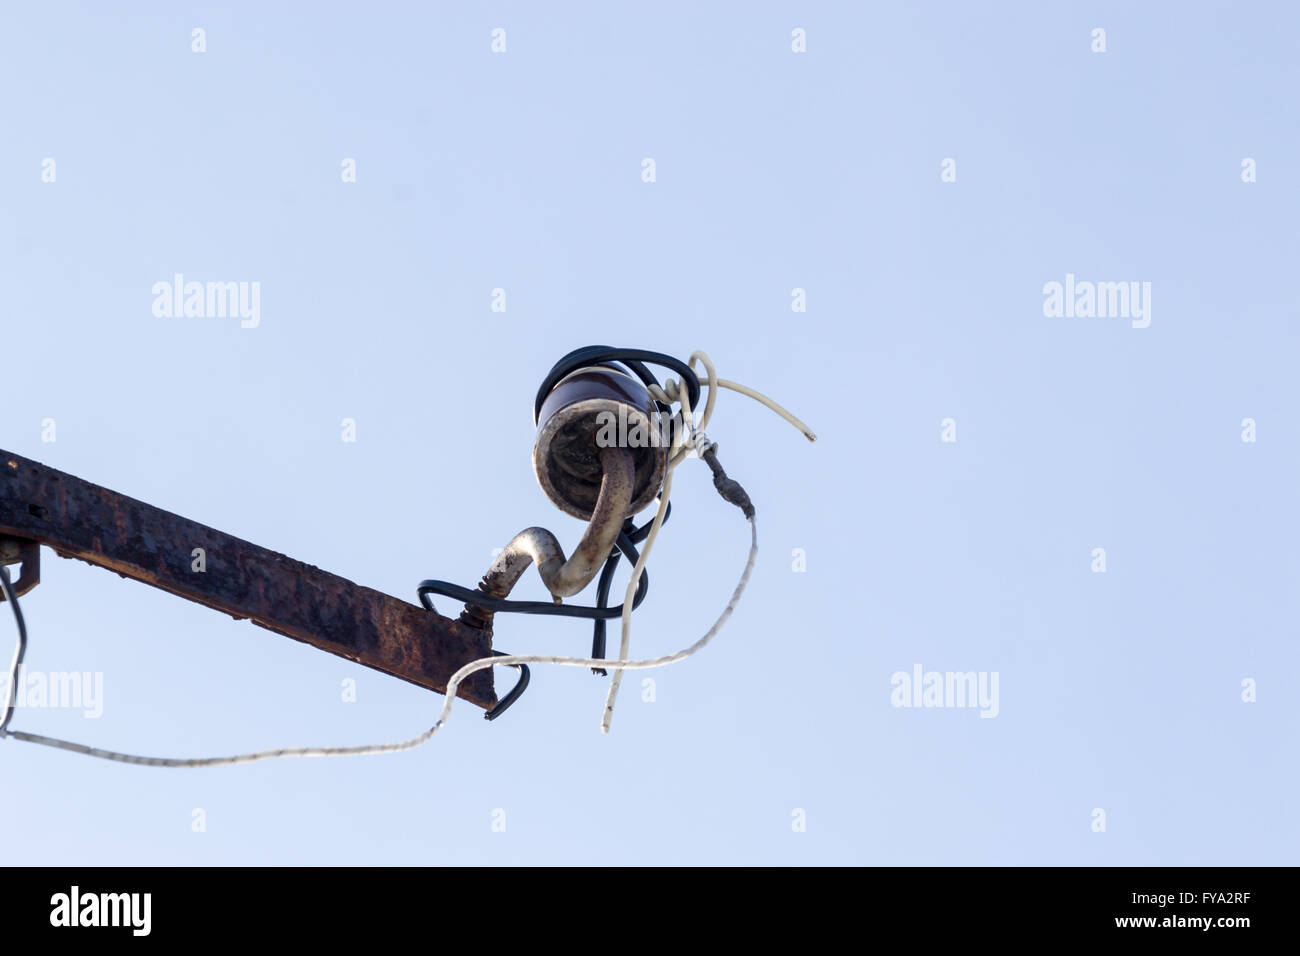 Single broken power insulator on a metal pole with clear sky Stock Photo